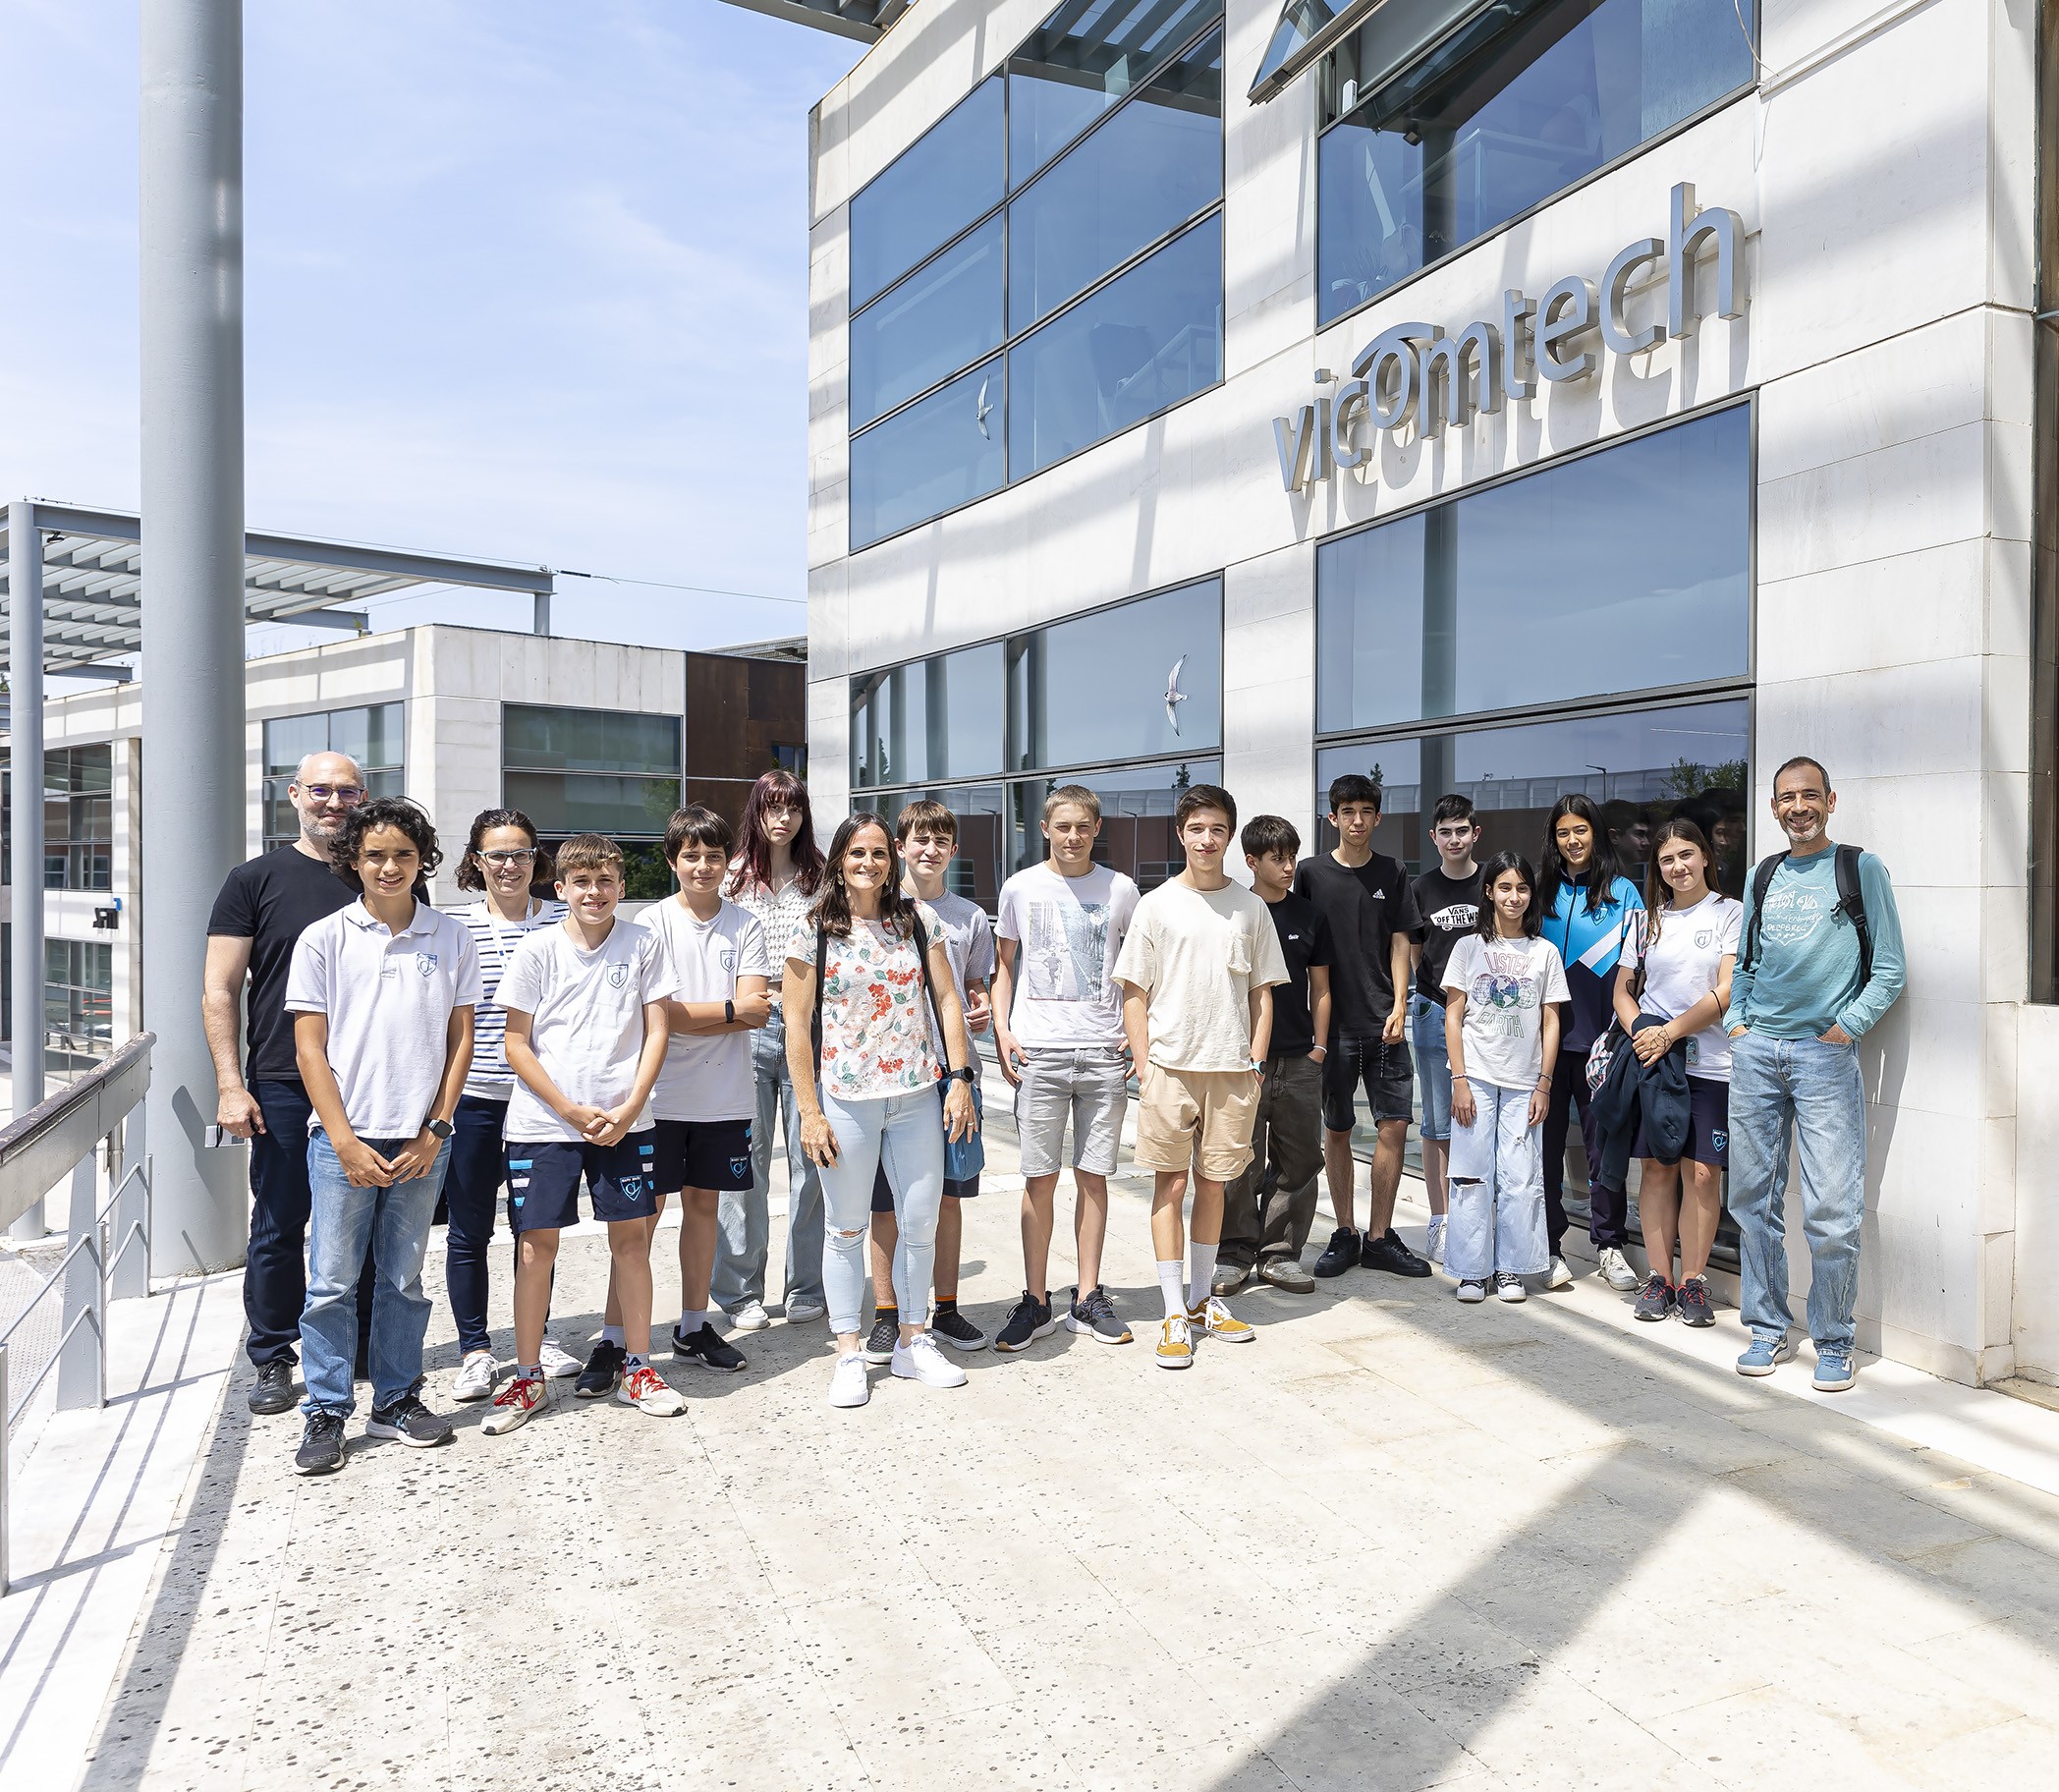 Students aged between 13 and 16 from the Academia Algorithmics Donostia take up Vicomtech's challenge and develop applications and programming solutions in Python. 